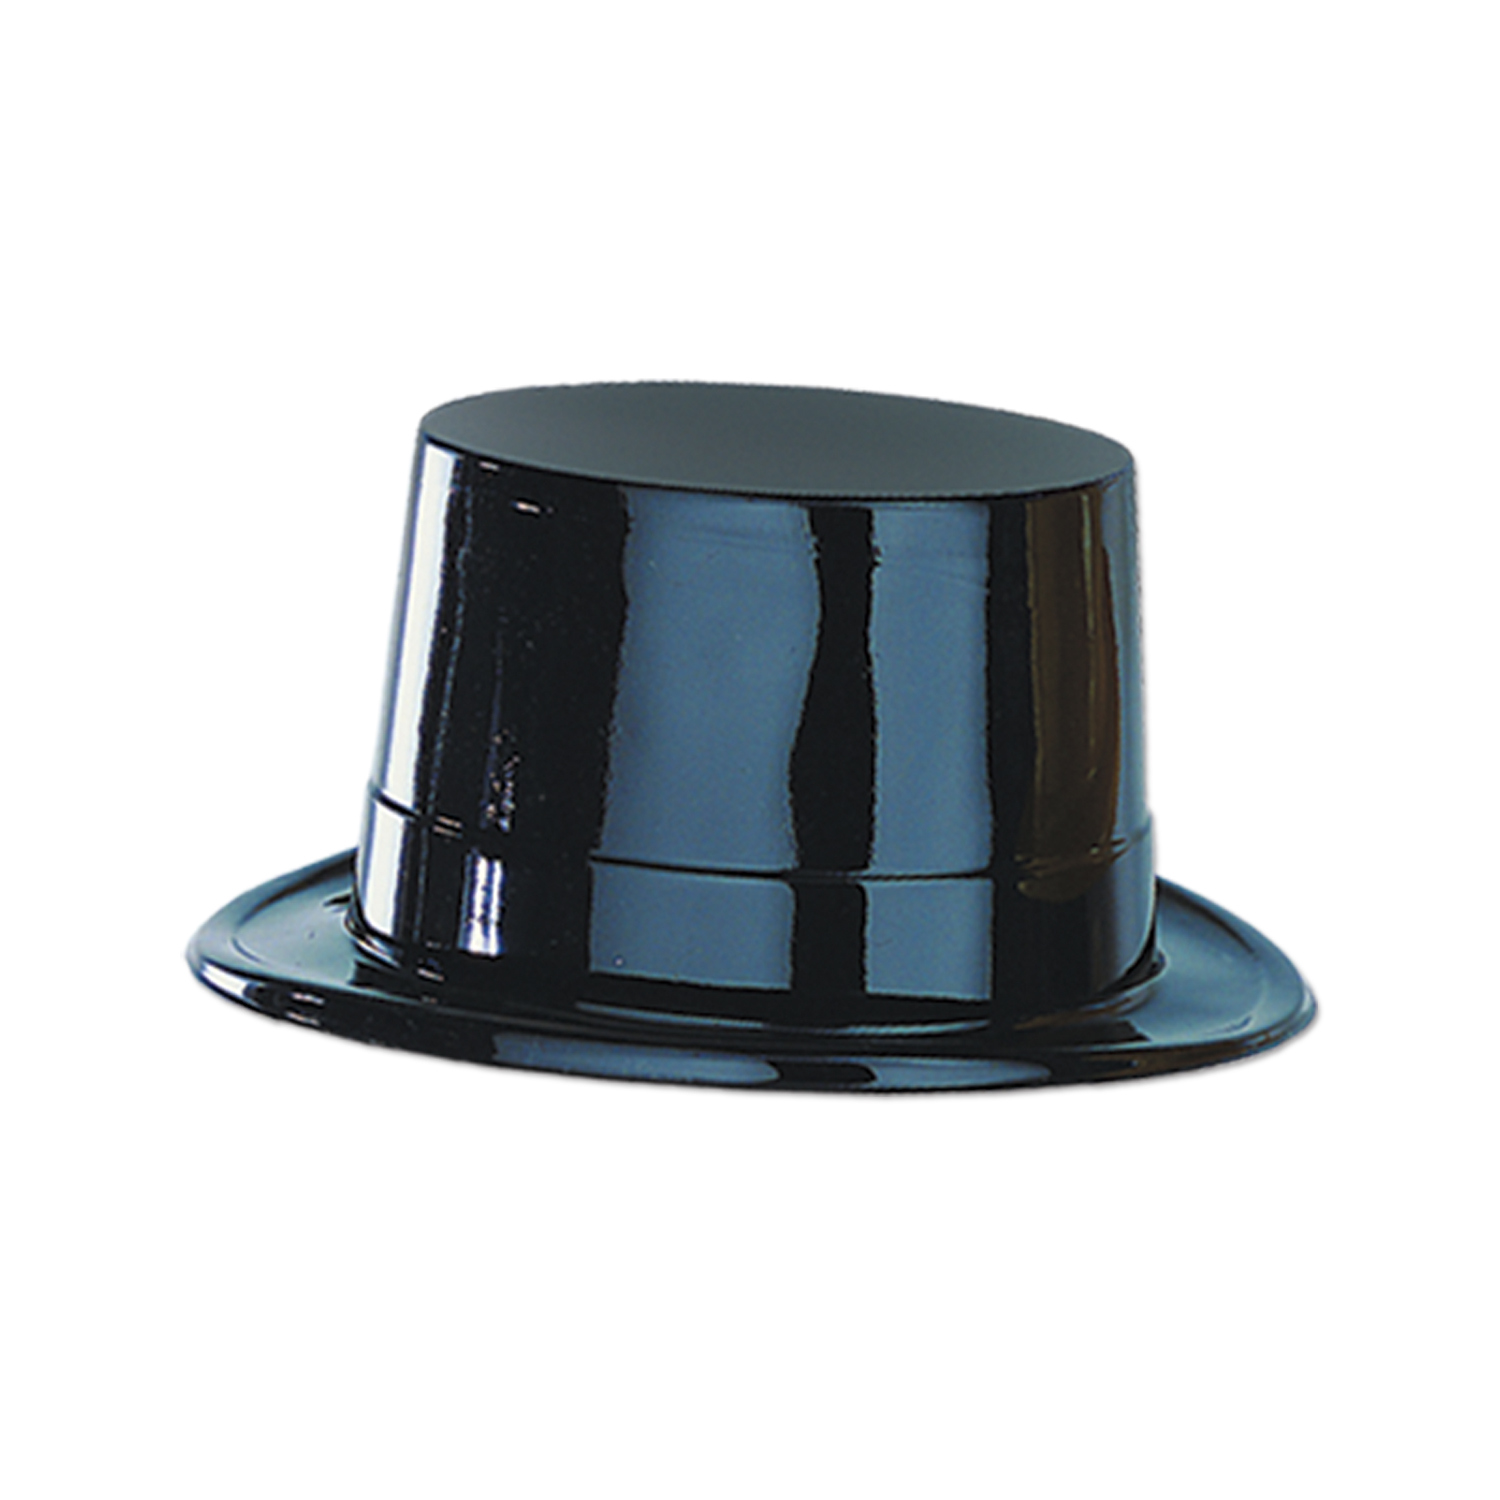 Plastic molded material shaped for the traditional top hat.